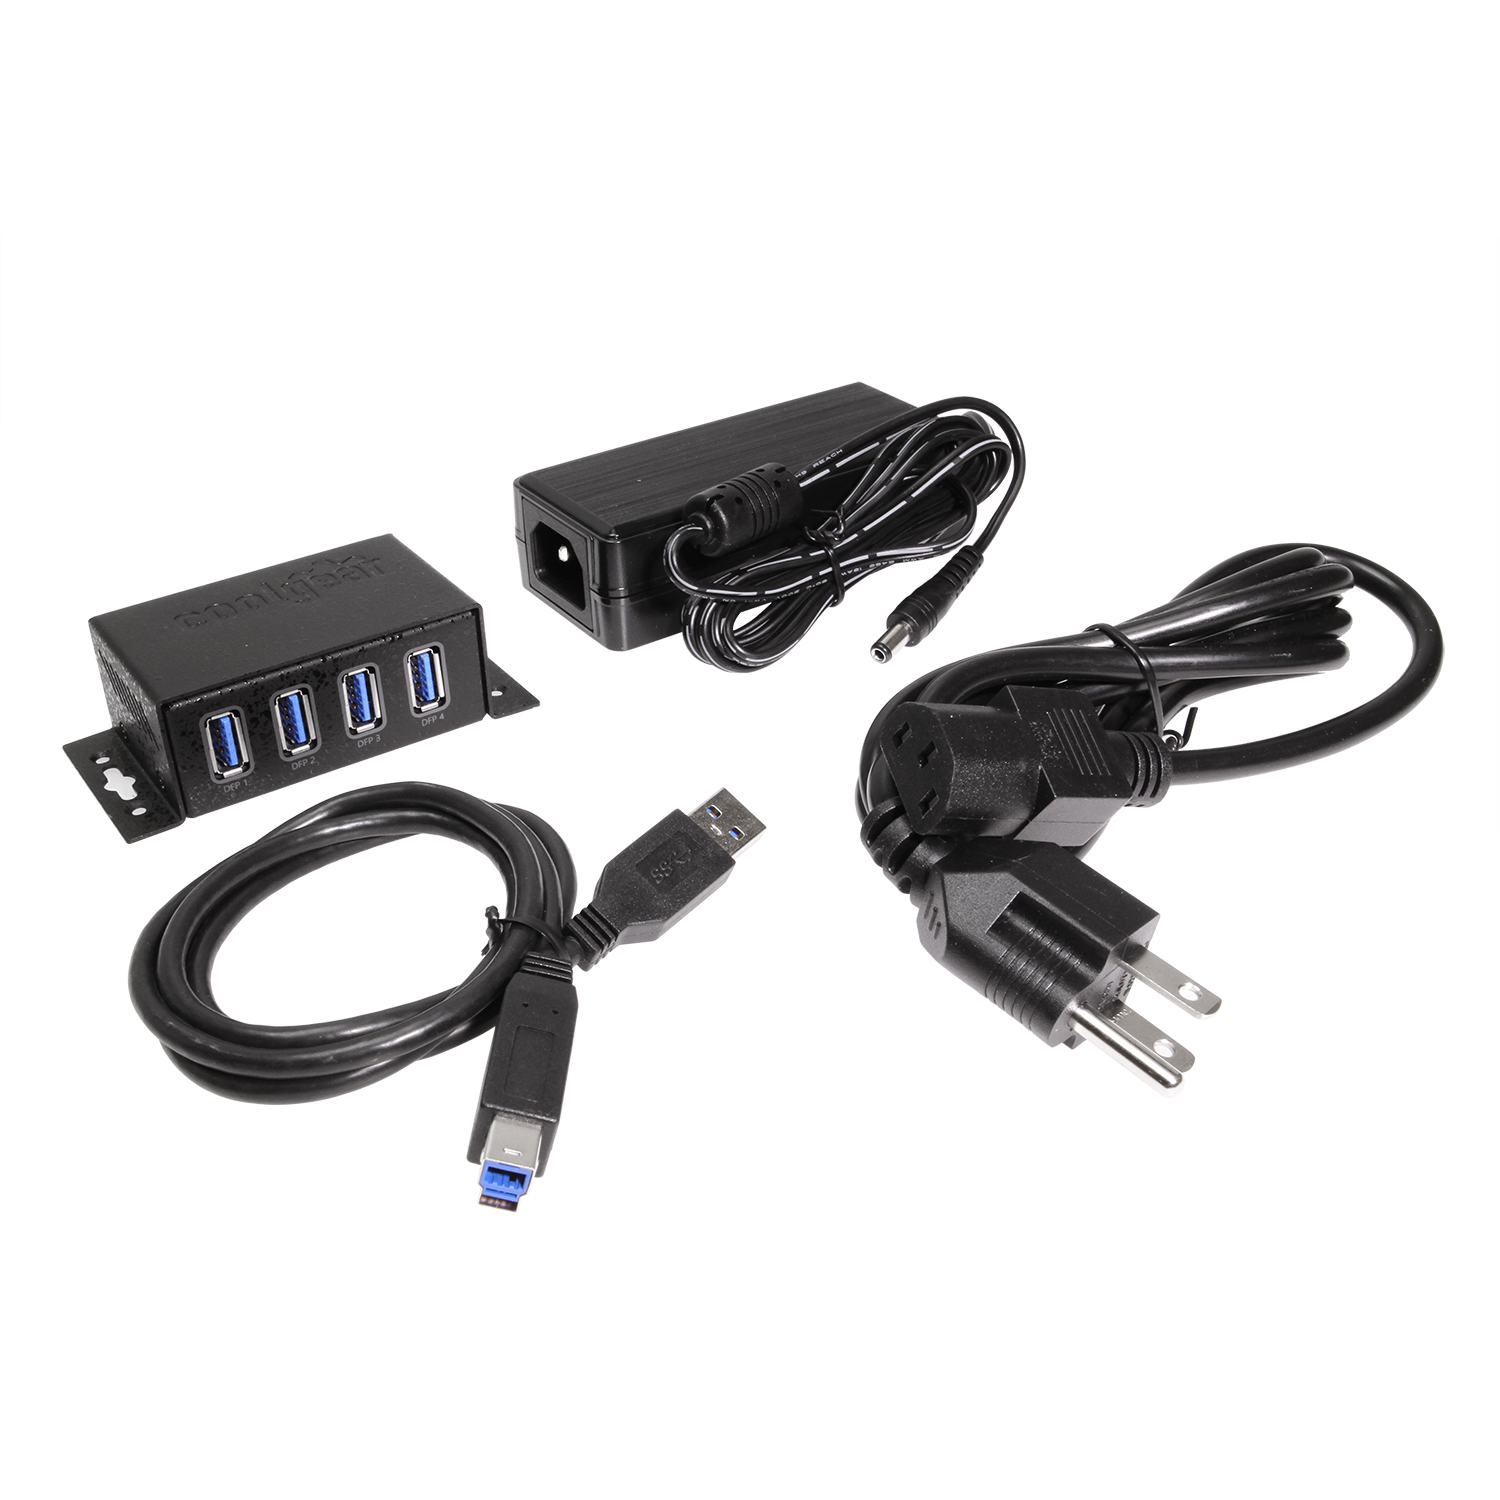 4-Port USB-A Hub with 5V 2A Power Supply, USB Hubs and Cards, USB Cables,  Adapters, and Hubs